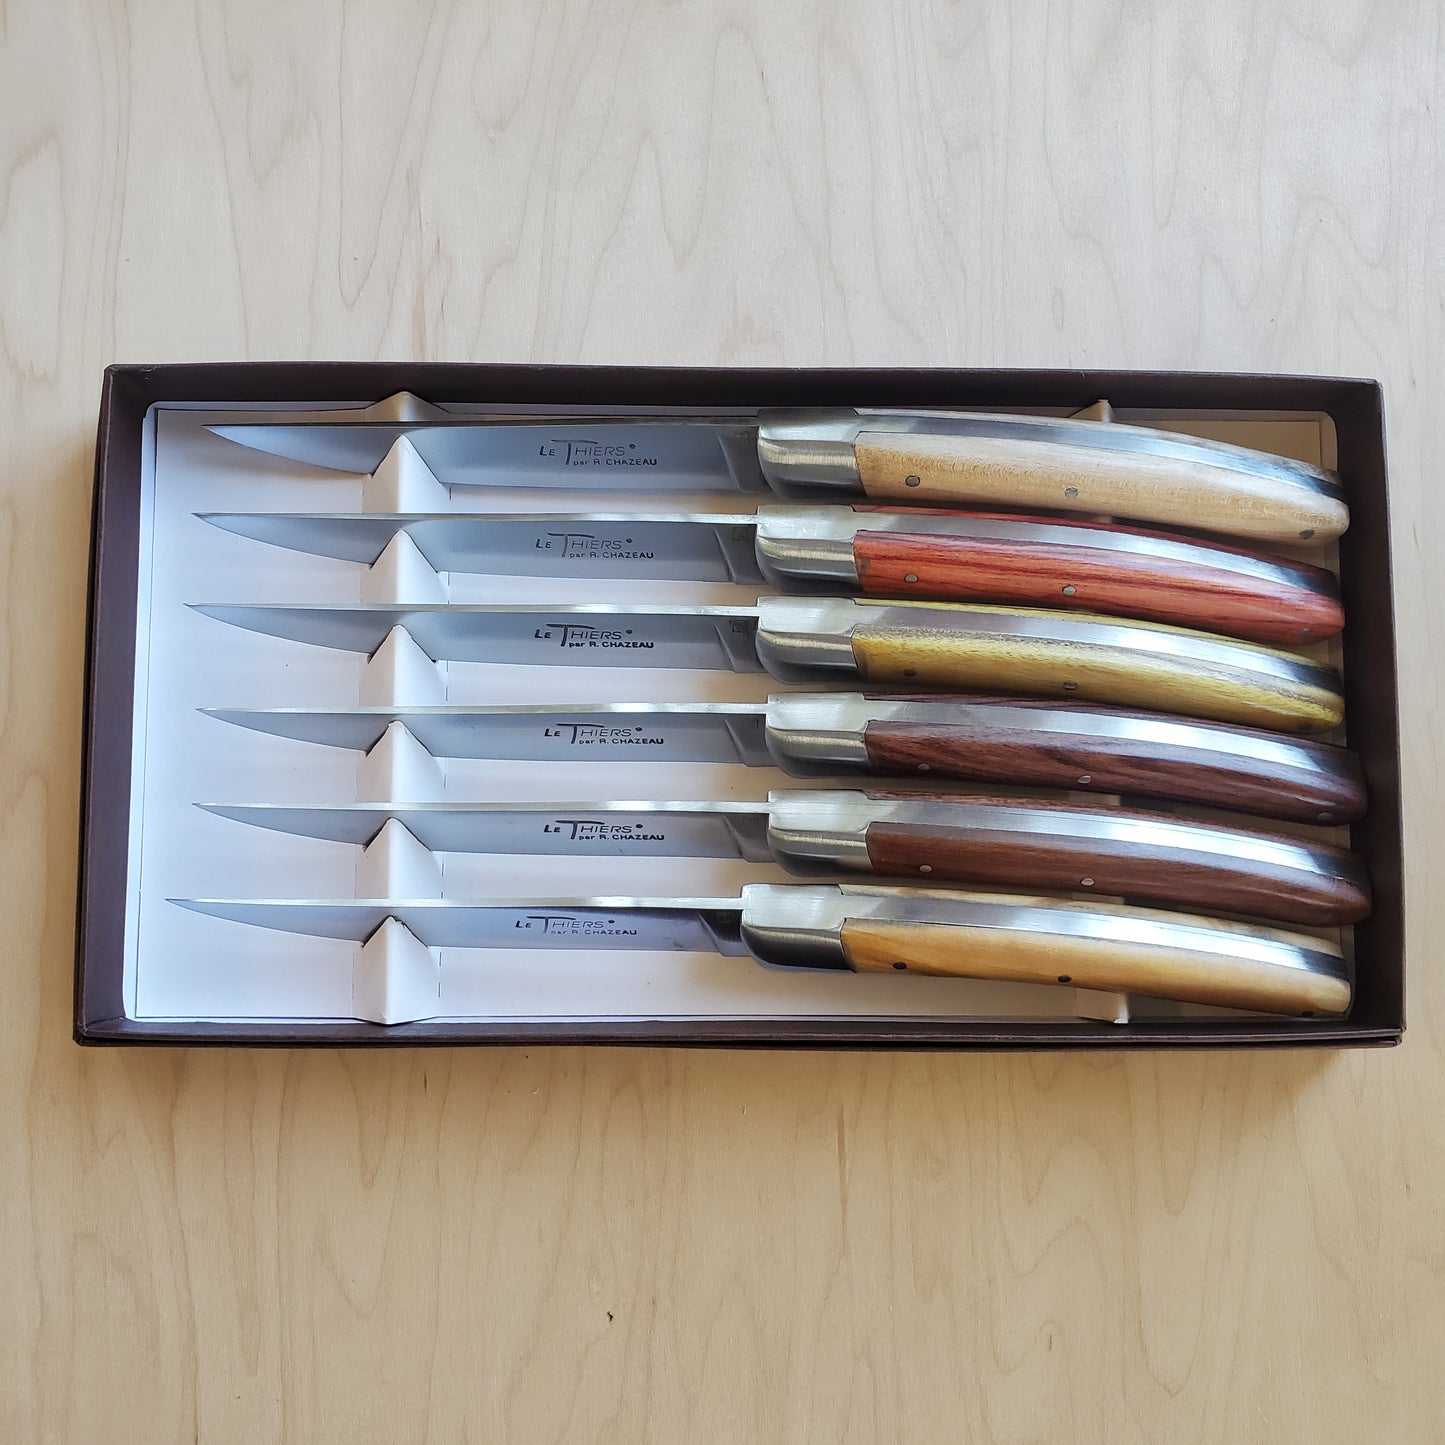 Le Thiers R. Chazeau Steak Knife Set of 6 - Mixed Woods